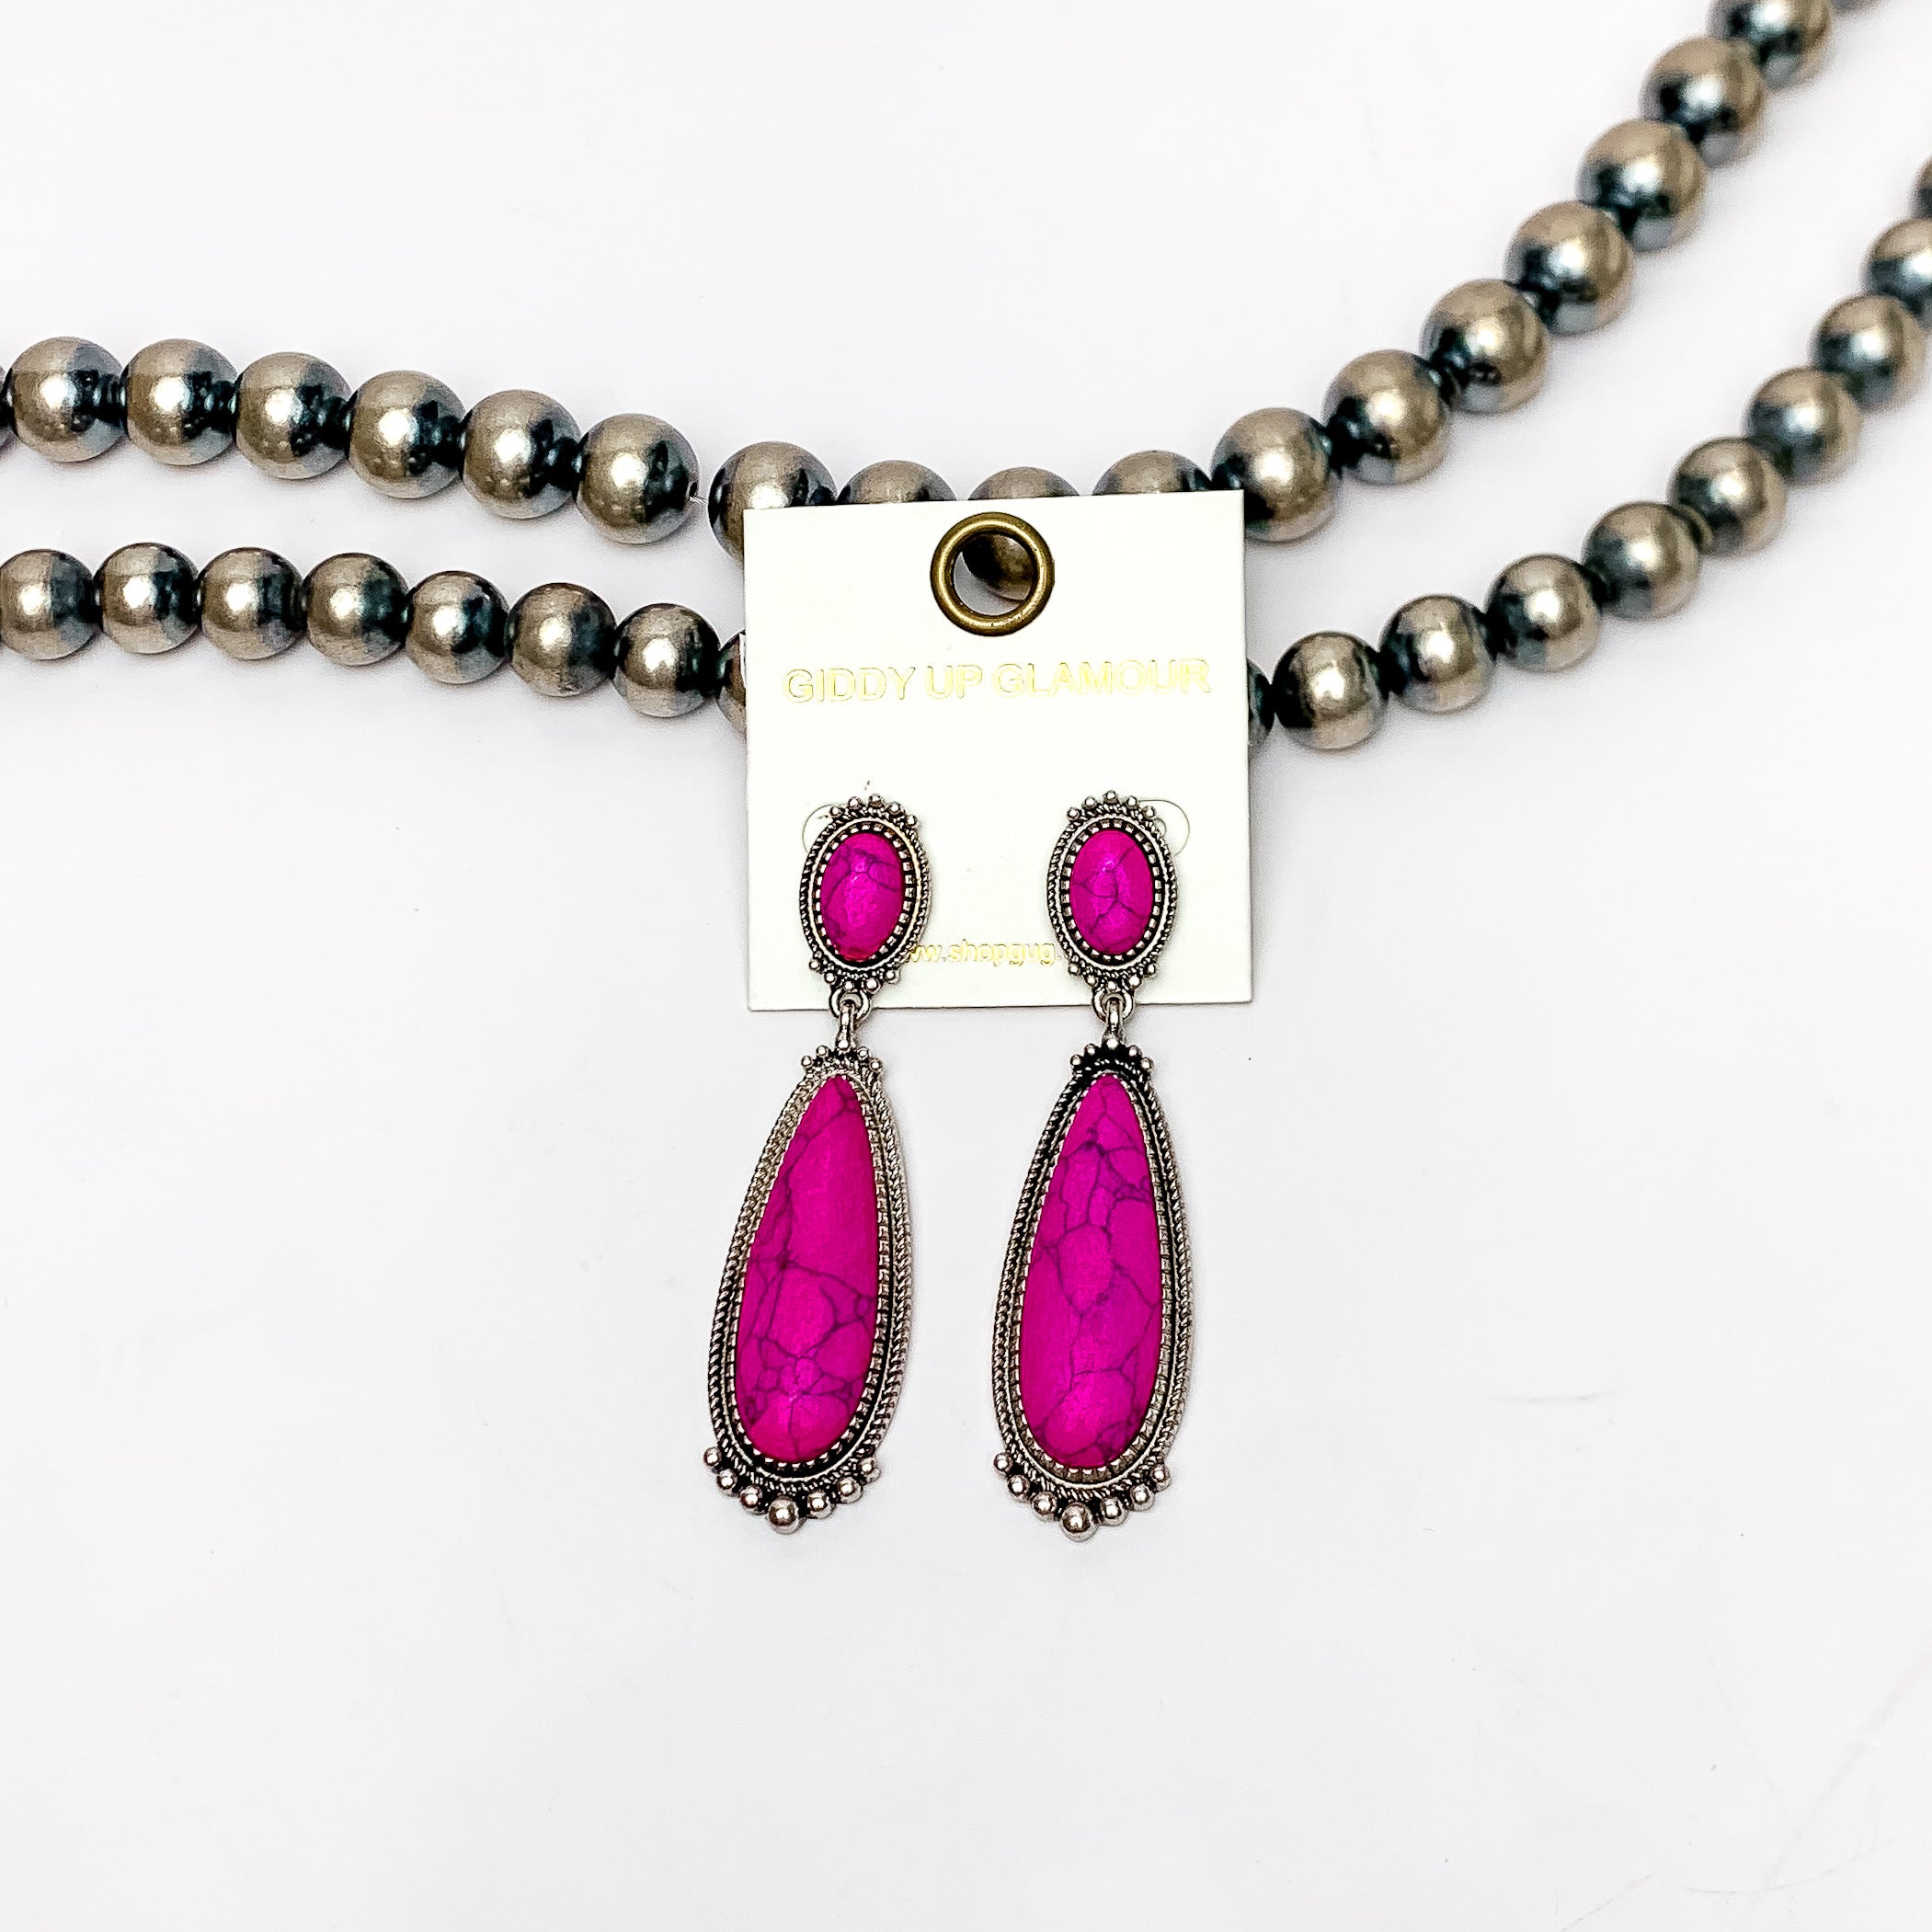 Southern Saturdays Silver Tone Drop Earrings in Hot Pink. These earrings featured two large stones. The background of the picture is white and the earrings are laying against Navajo pearls.